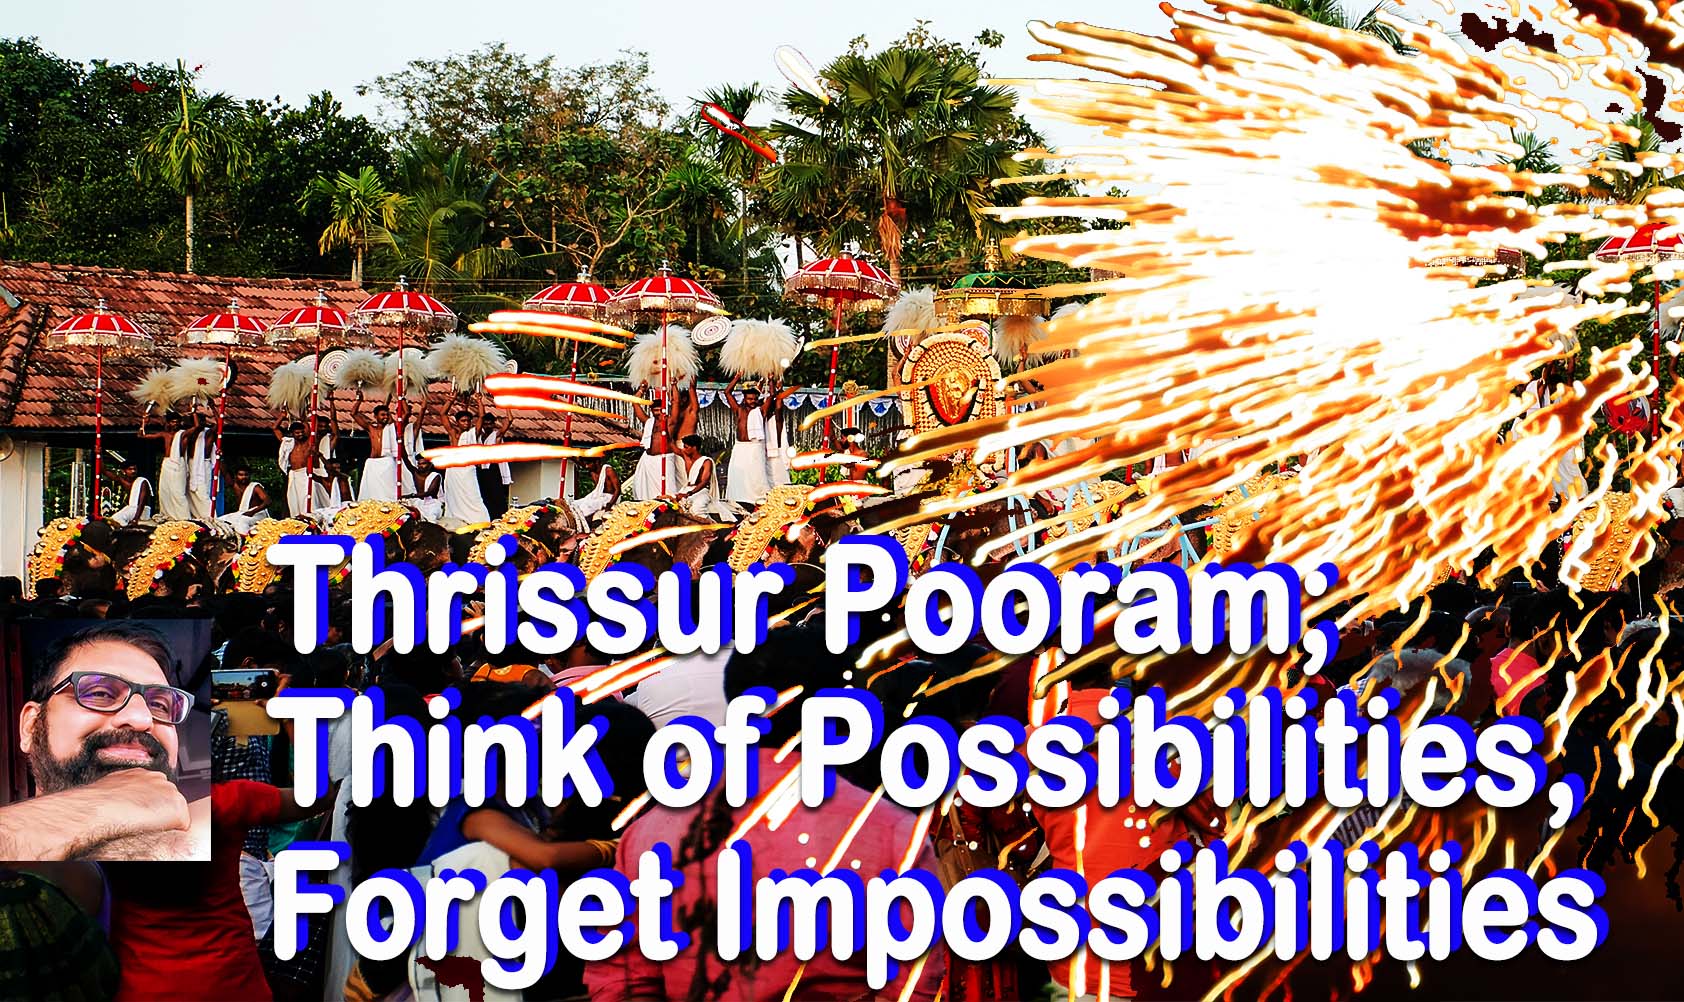 Thrissur Pooram; Think of Possibilities, forget Impossibilities